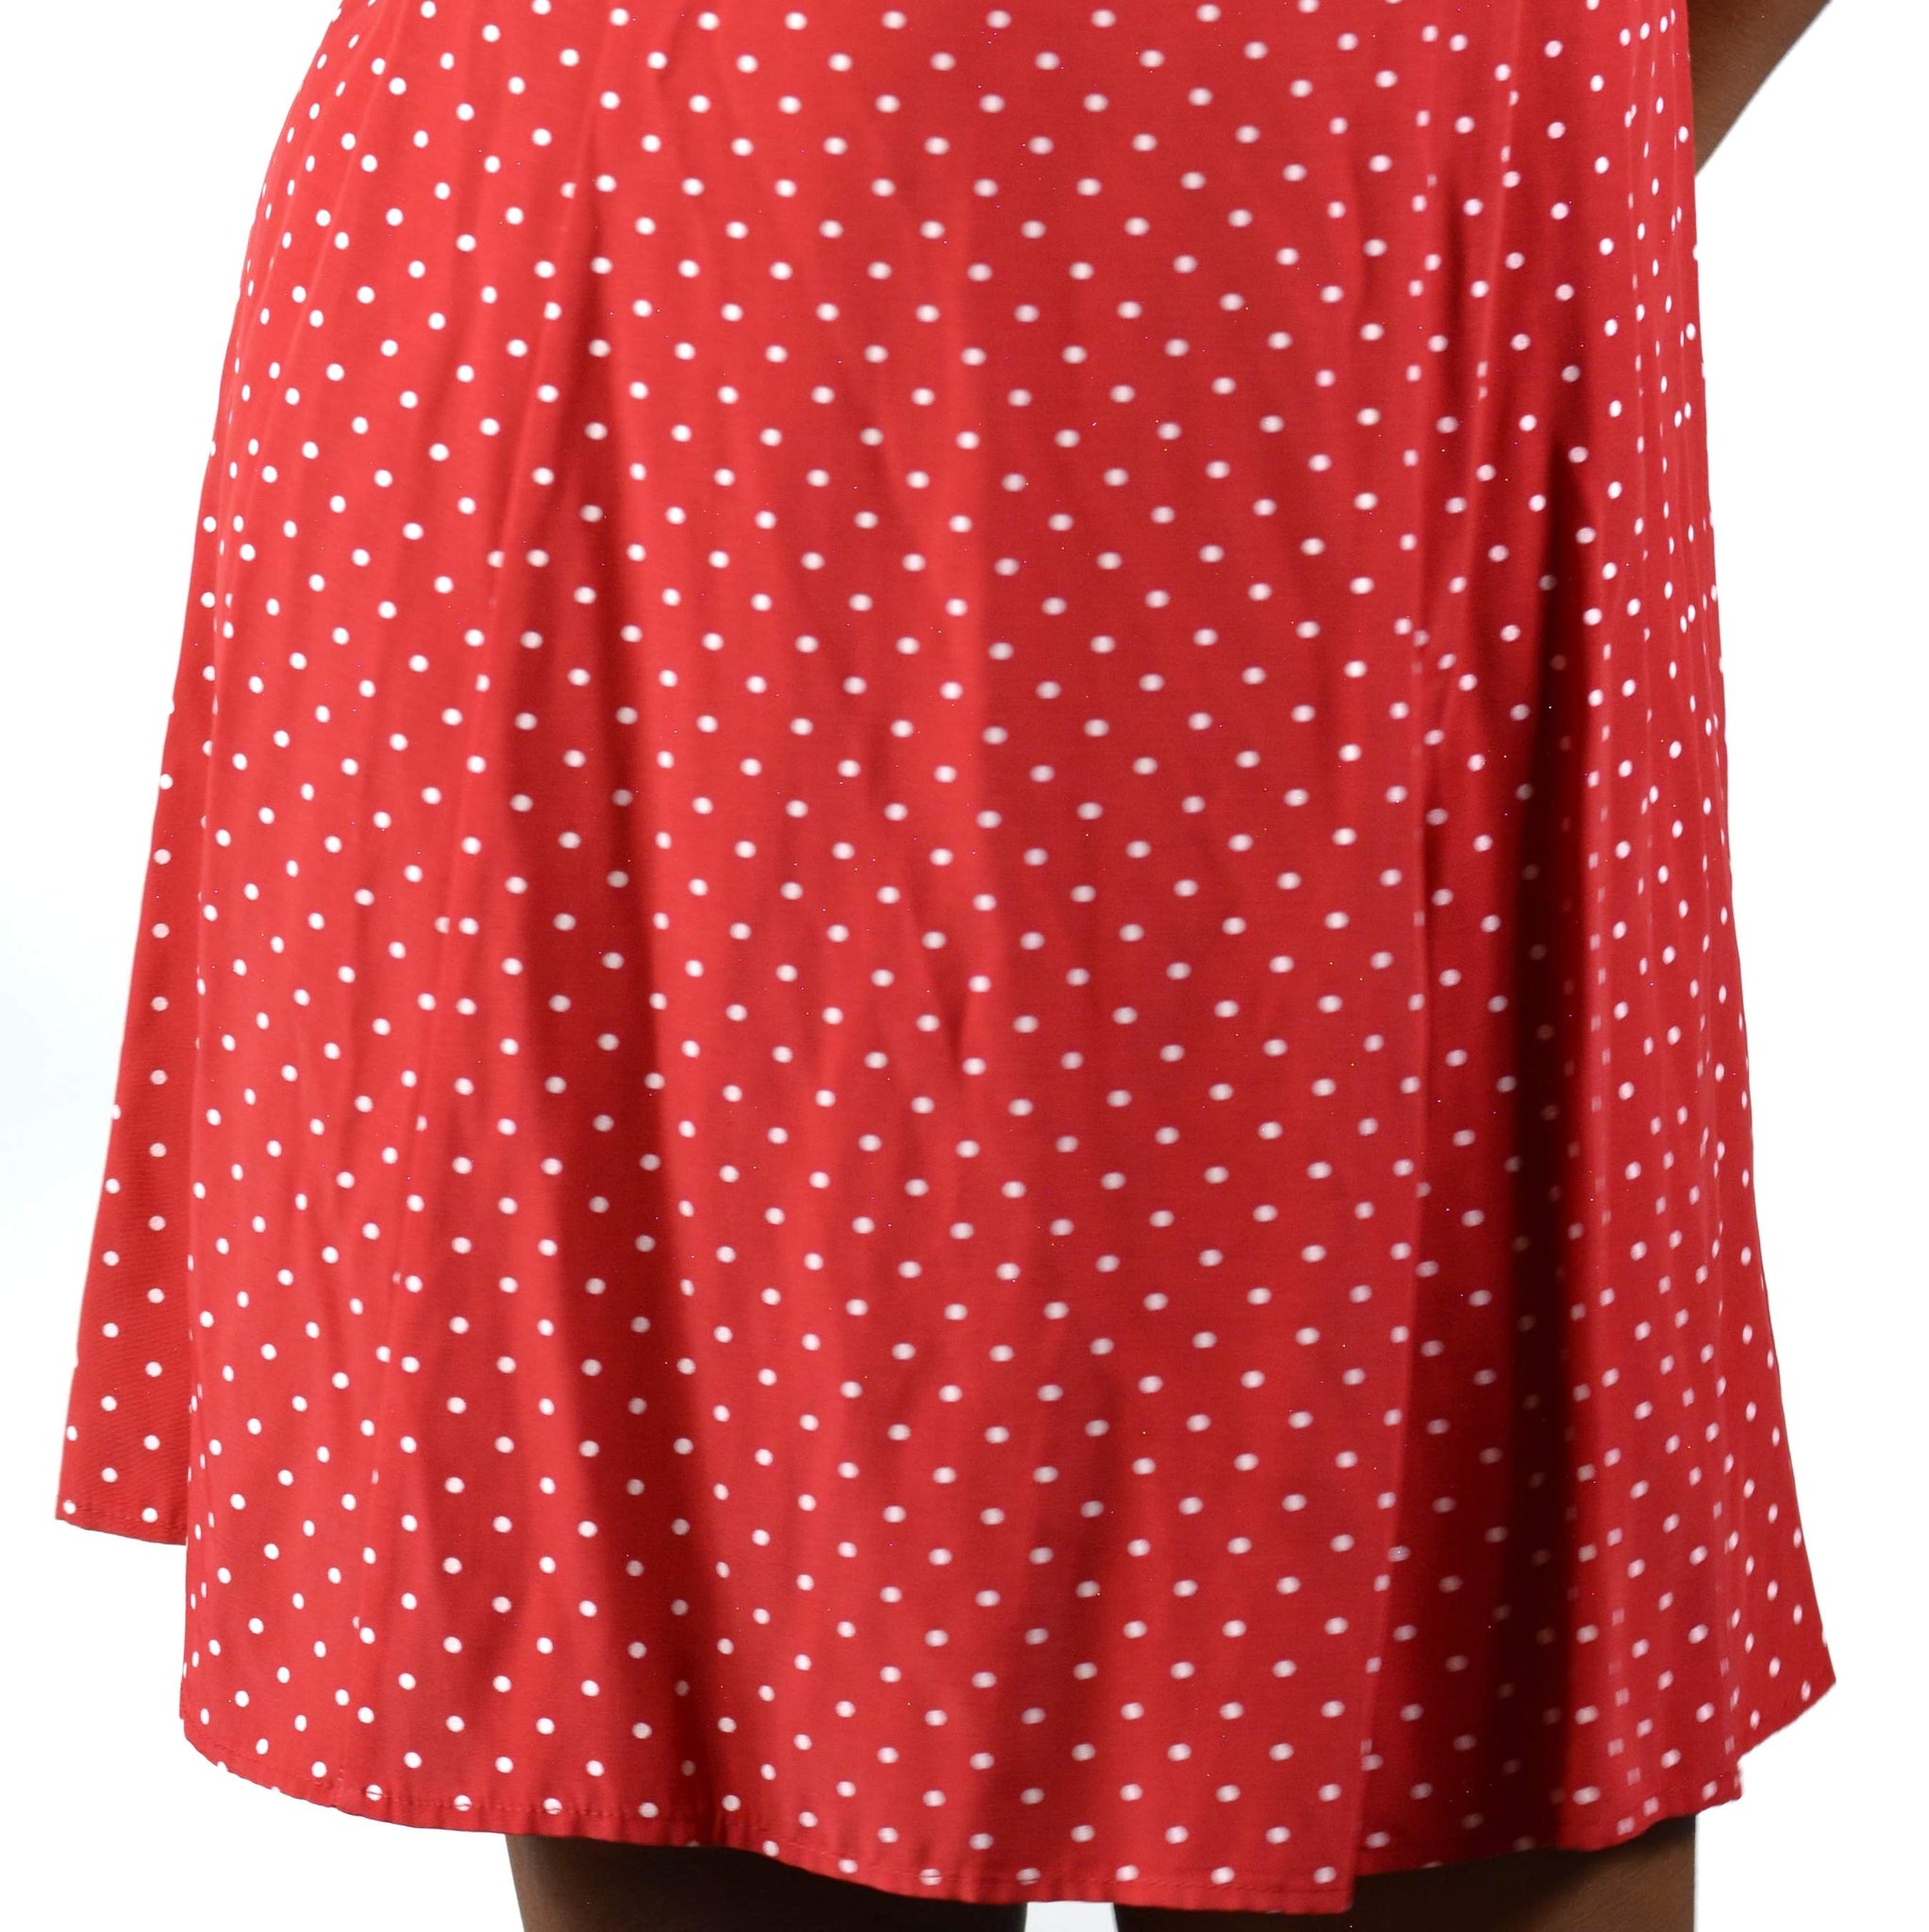 Vintage Corset Rayon Dress Kmart 90s Red Polka Dot Size Small New